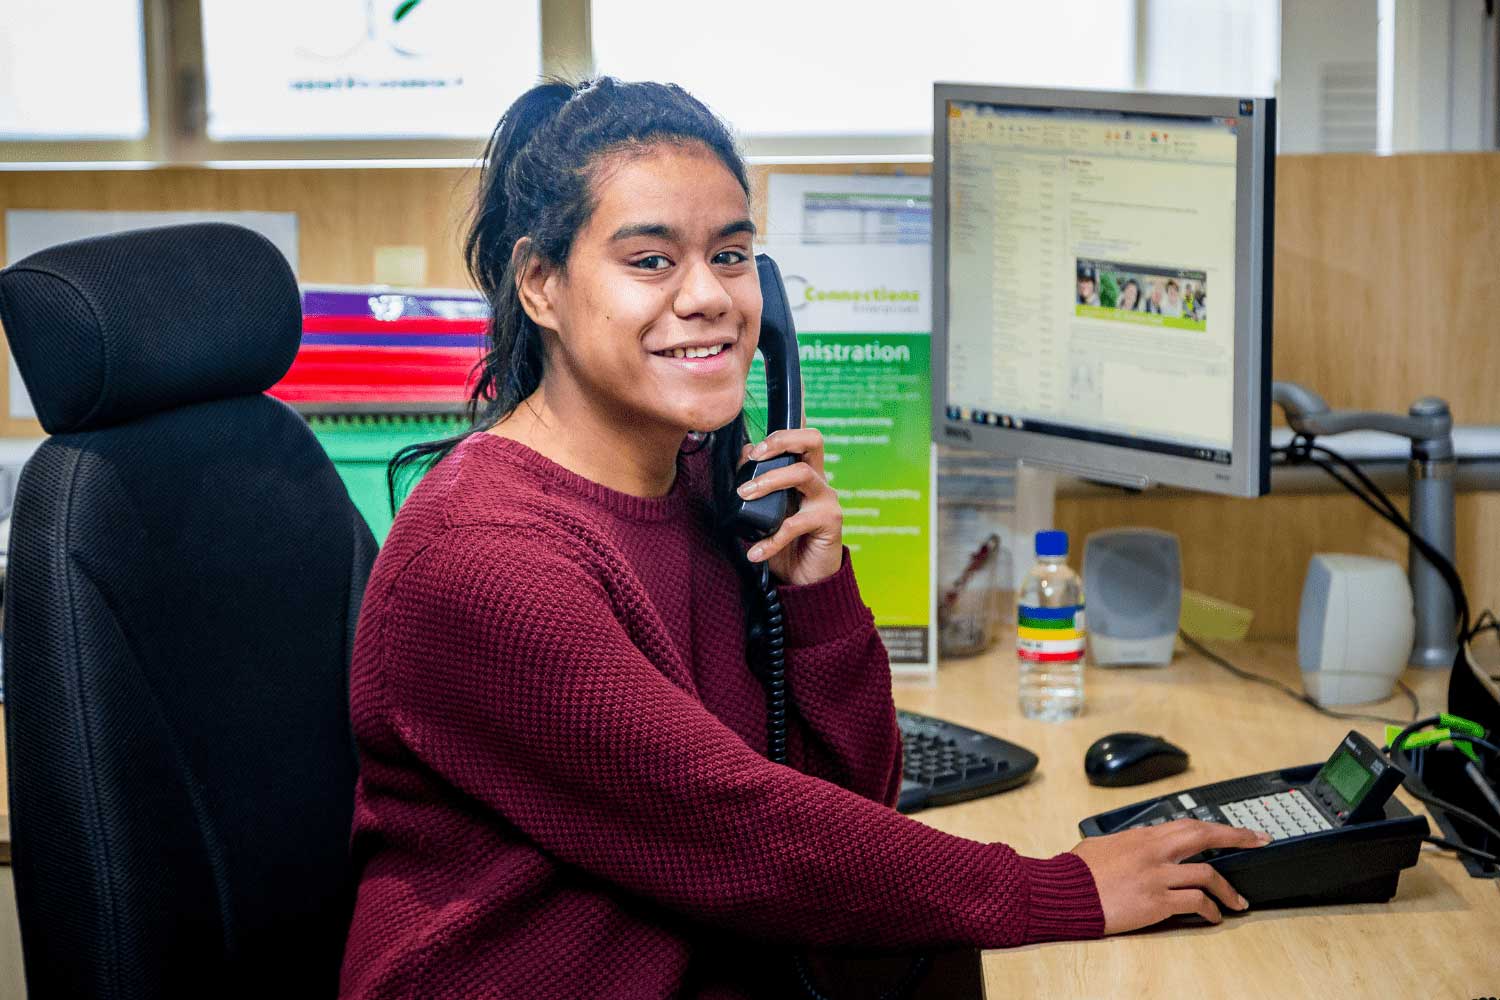 Young Women Smiling While Answering Phone Call Through OC Connections Supported Employment Program